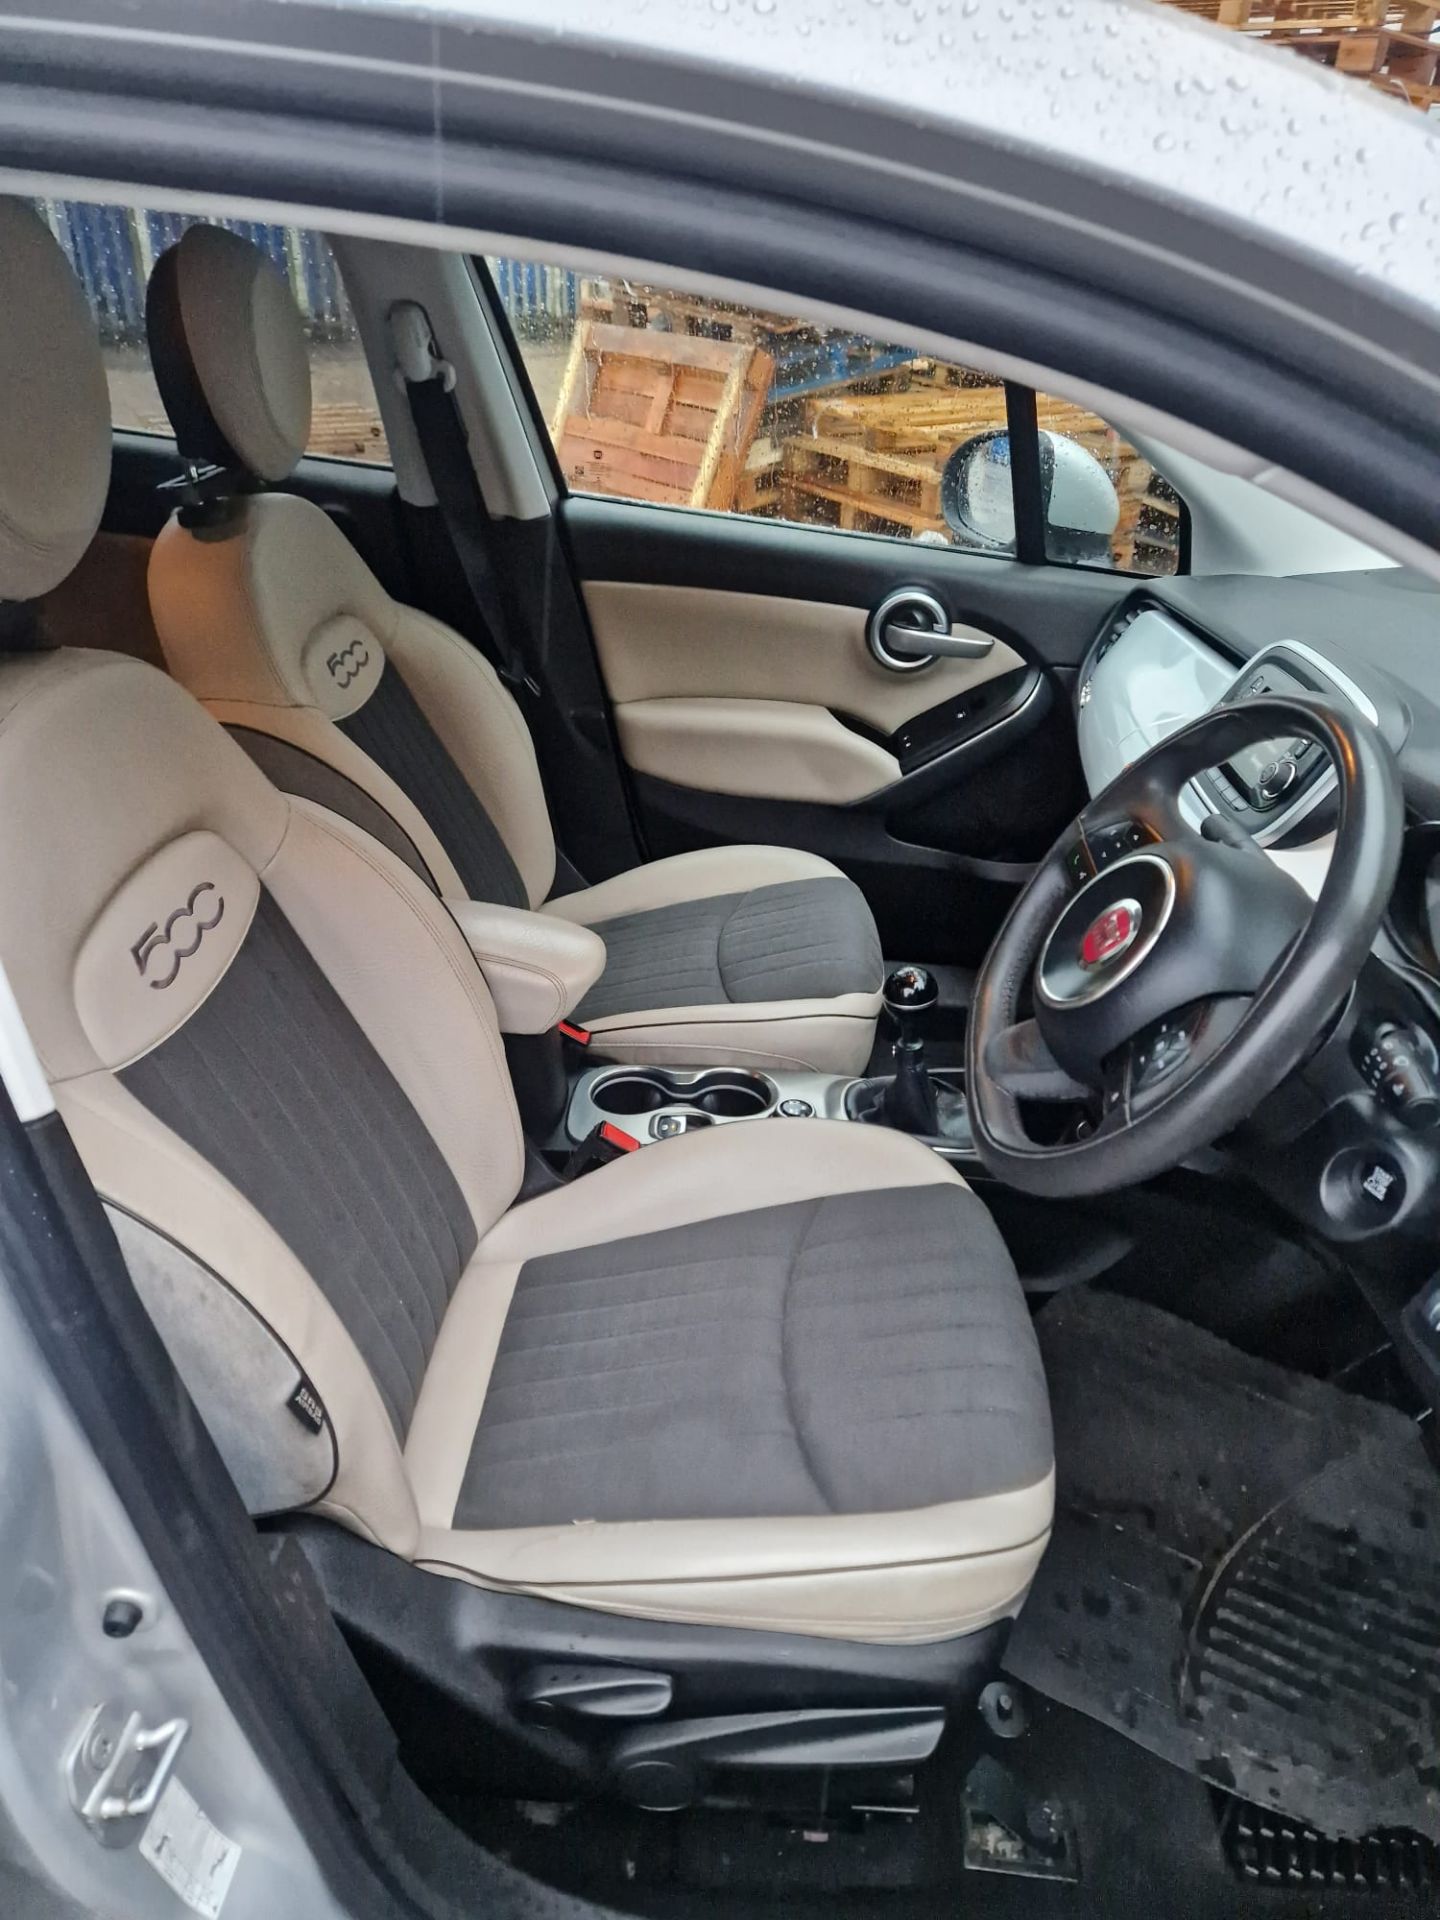 65 plate Fiat 500X Lounge multi air 1.4i, MOT until 1/10/2024, 84190 miles (unchecked), comes with 2 - Image 12 of 40